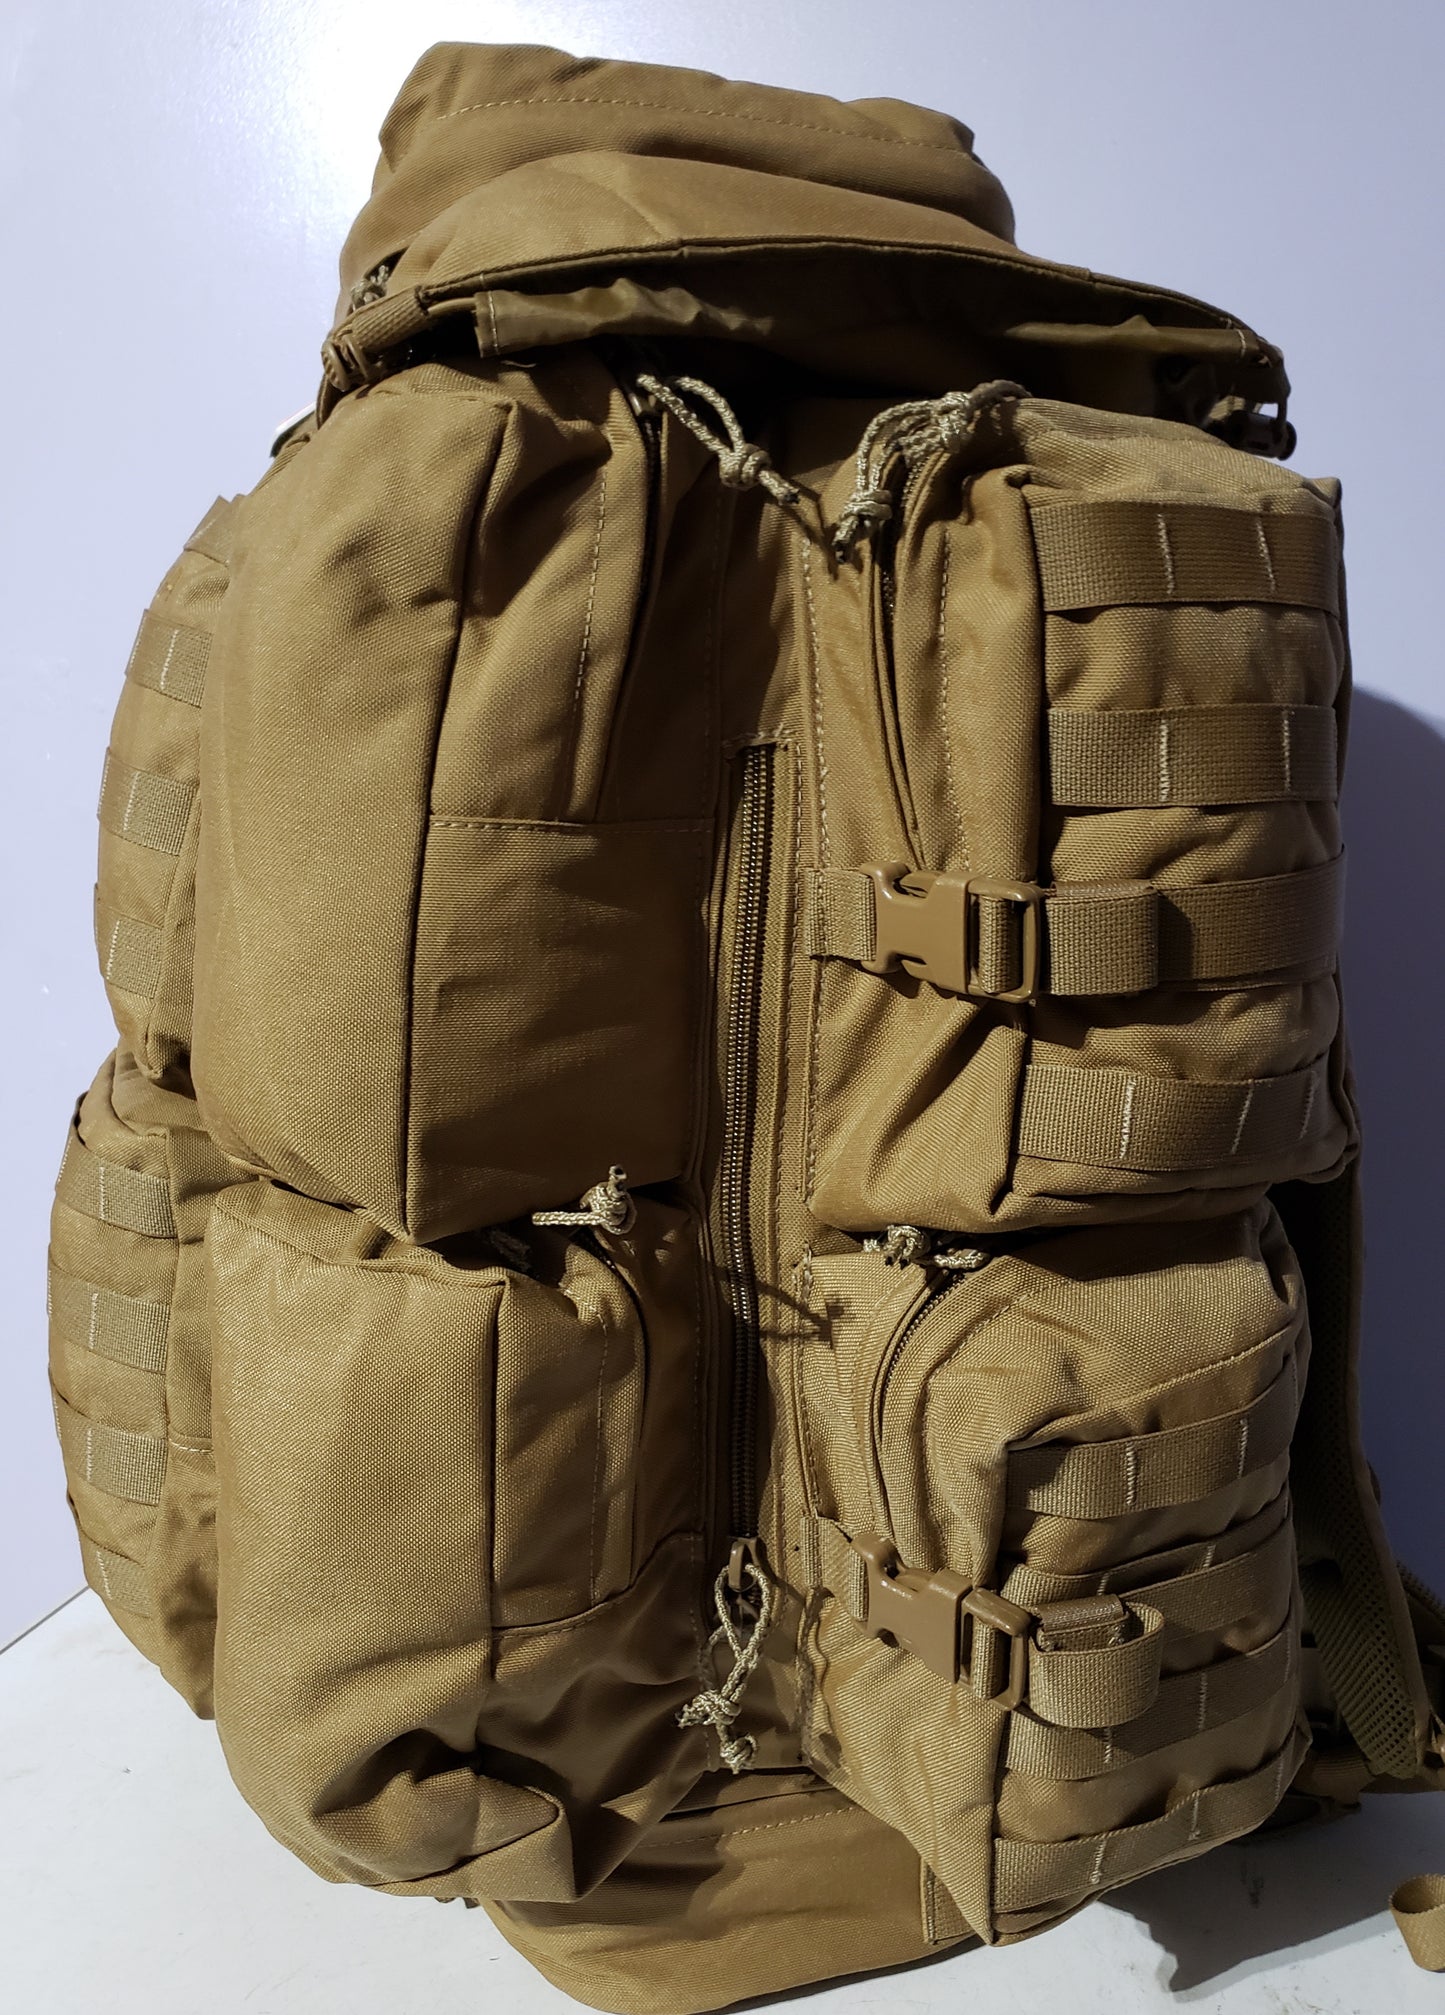 sasquatch - bigfoot -BACK PACK - ruck sack - backpack - rucksack - ruck - military style - tactical pack - black tactical - usa made gear - us - civilian pack - overland - outdoor - contingency - resiliency - self reliance - camping - hunting - off grid - survial pack - emergency pack - travel pack - internal frame 